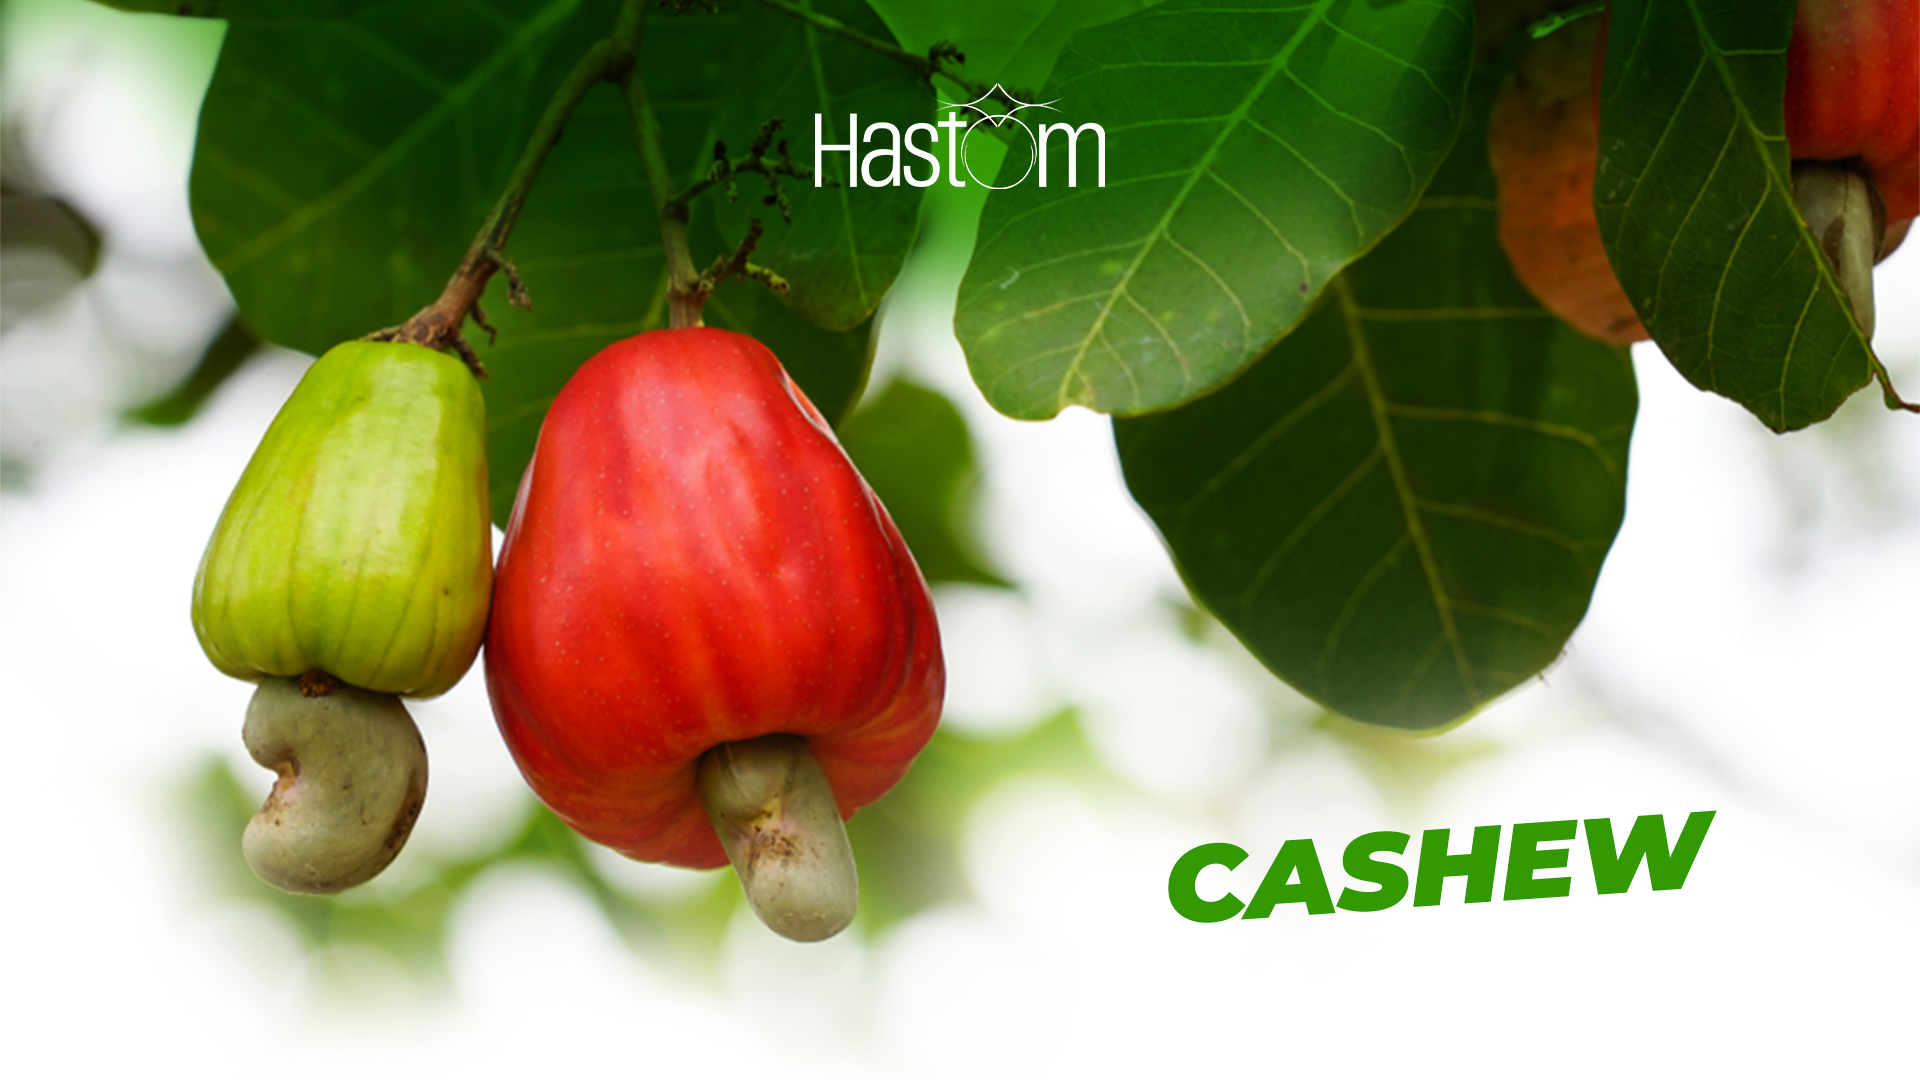 Harnessing Cashew: Solution to Beat Inflation